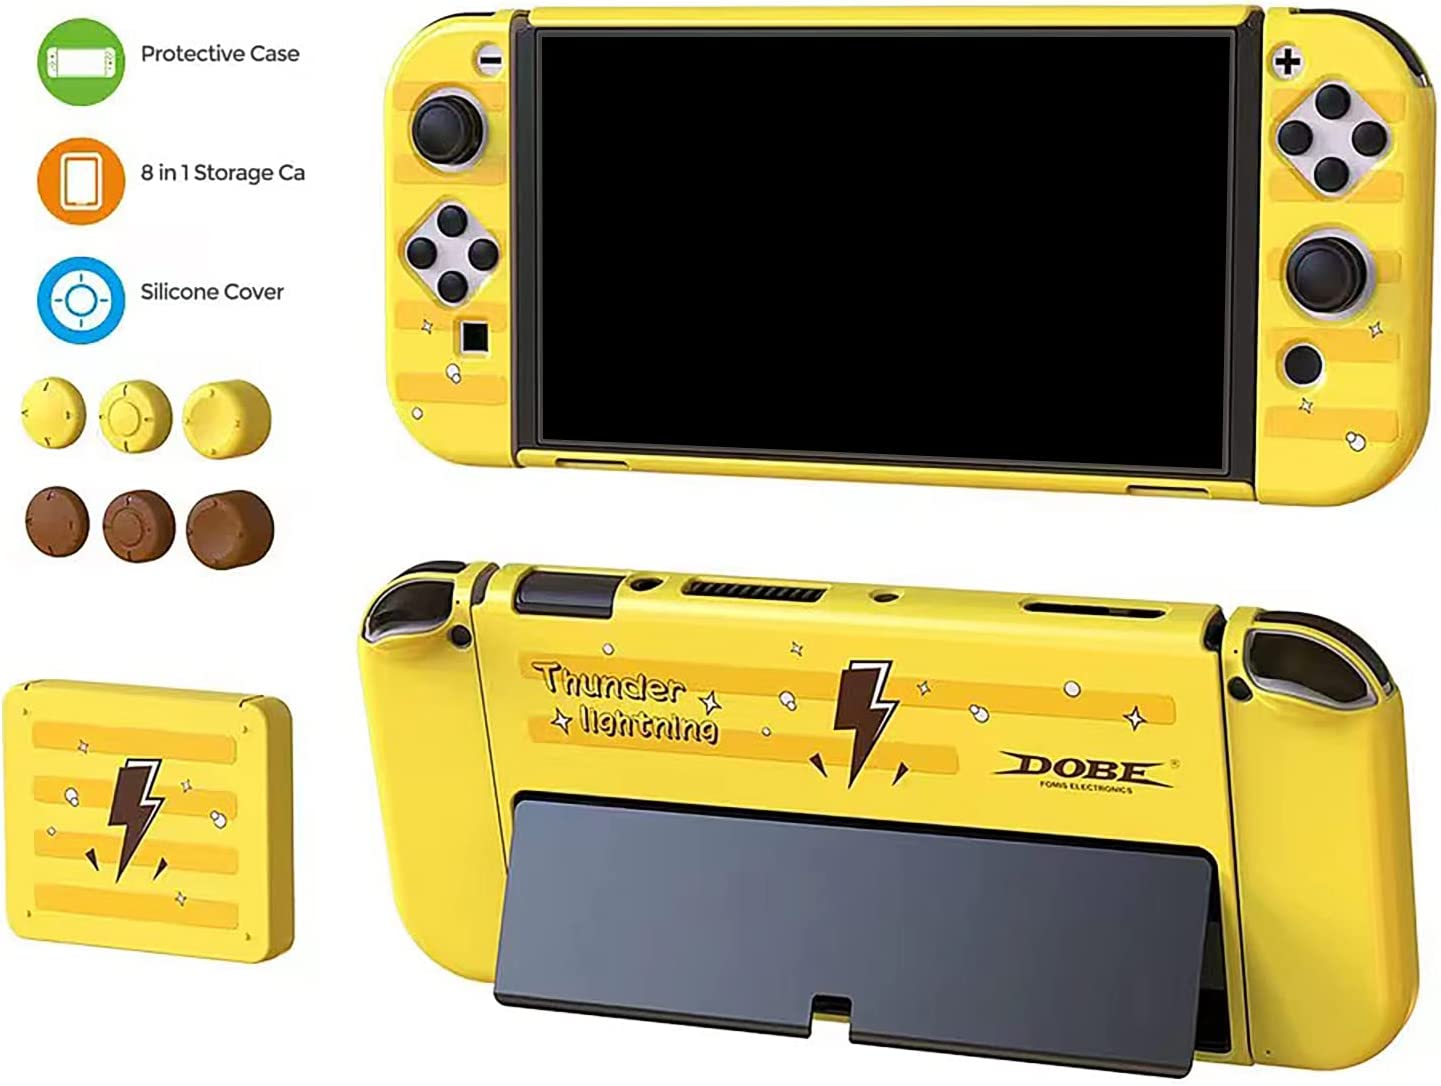 Switch OLED Protective Case, Switch OLED Pokemon Case with 8 in 1 Game –  ECHZOVE